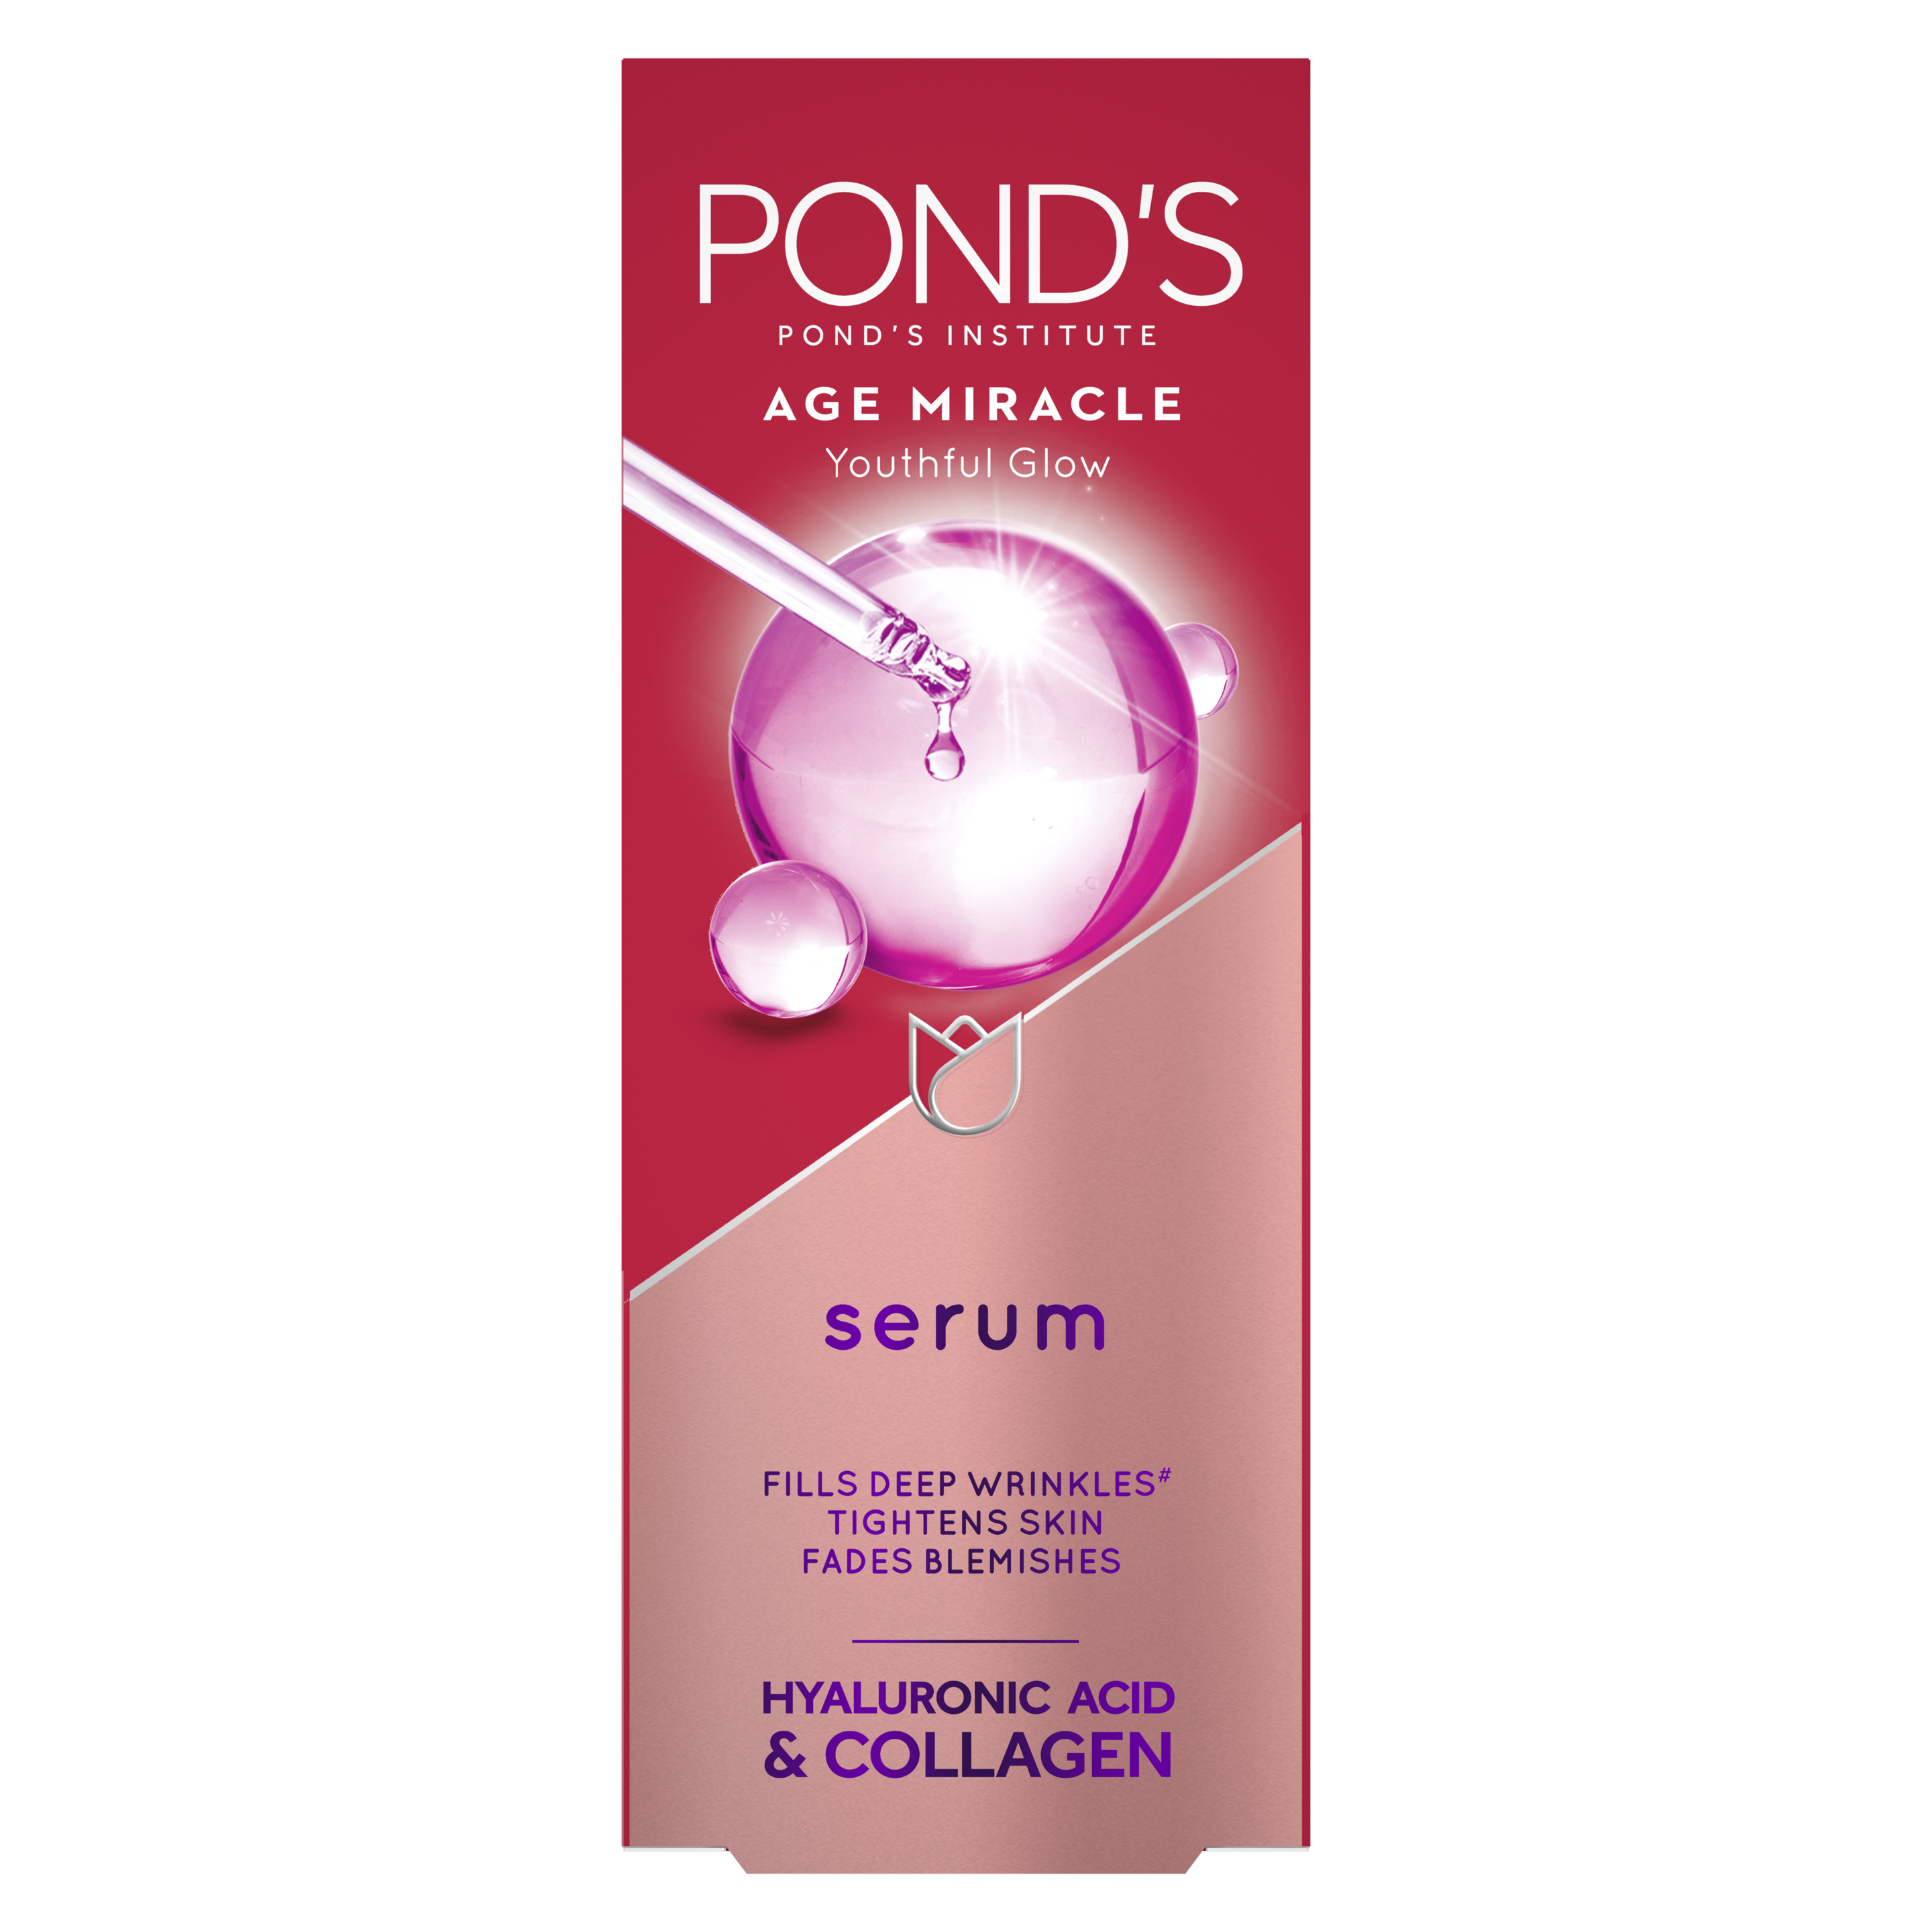 POND'S Age Miracle Double Action Face Serum